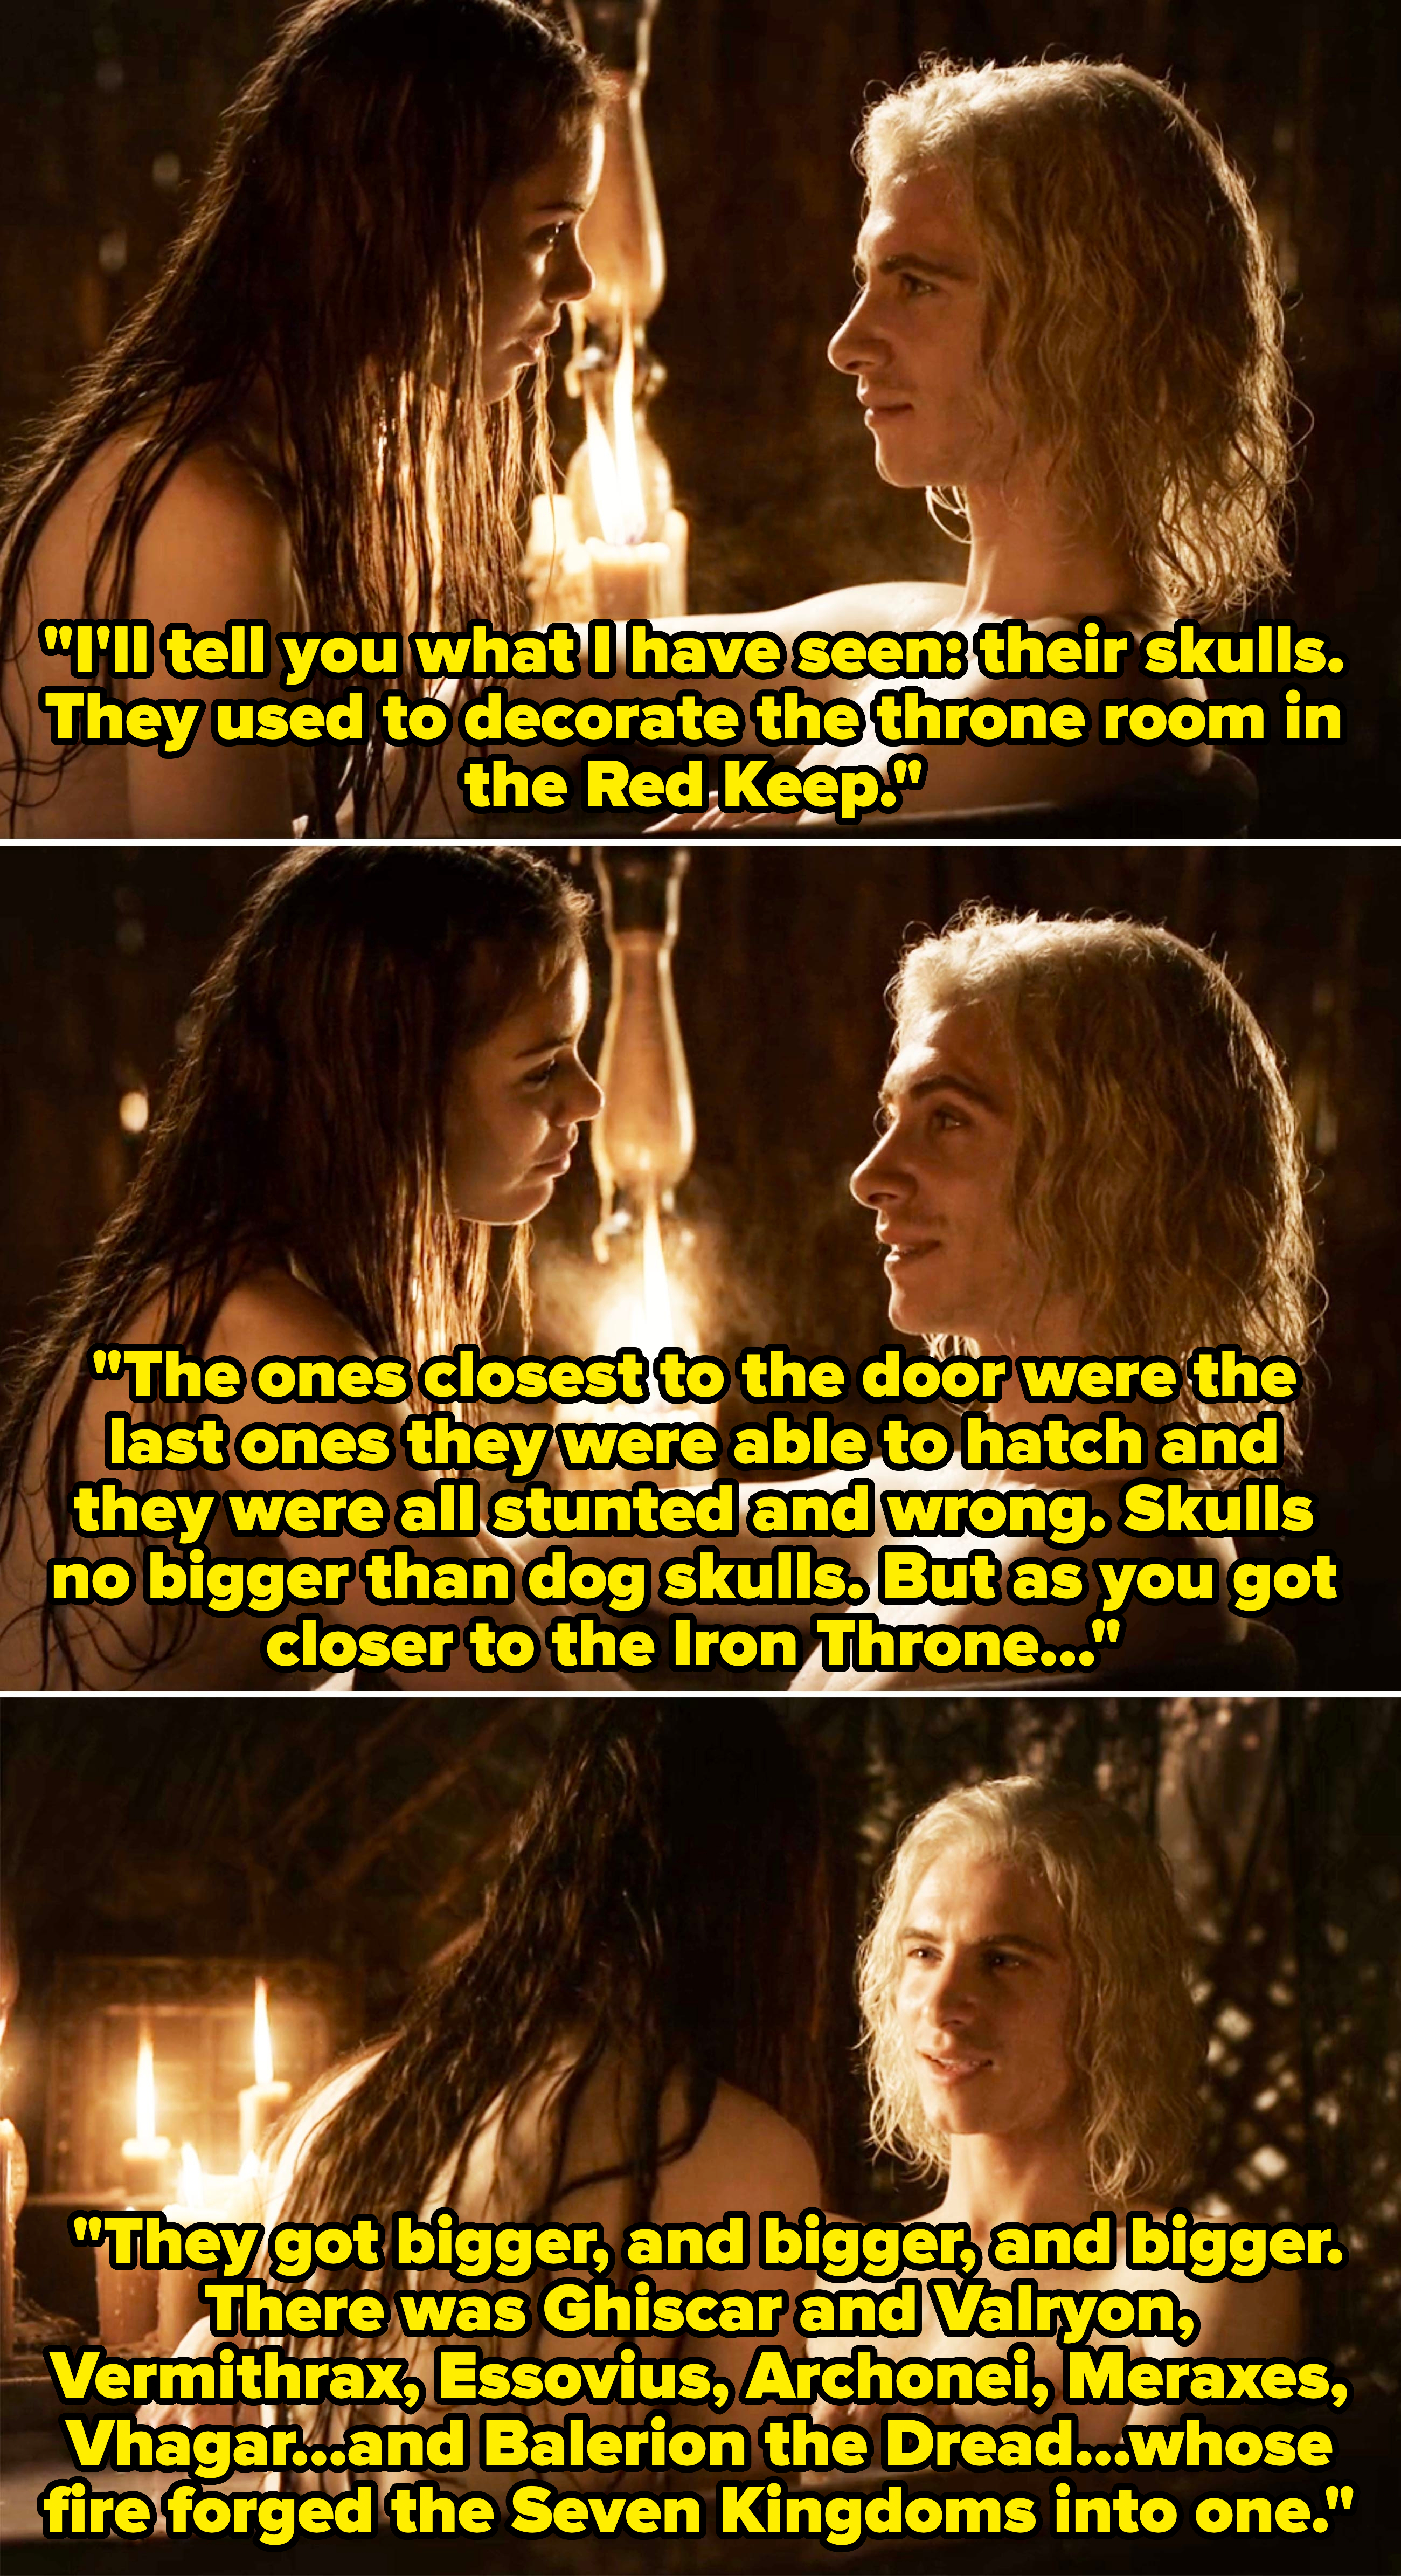 Viserys discussing the dragon skulls he used to name when he was a young boy